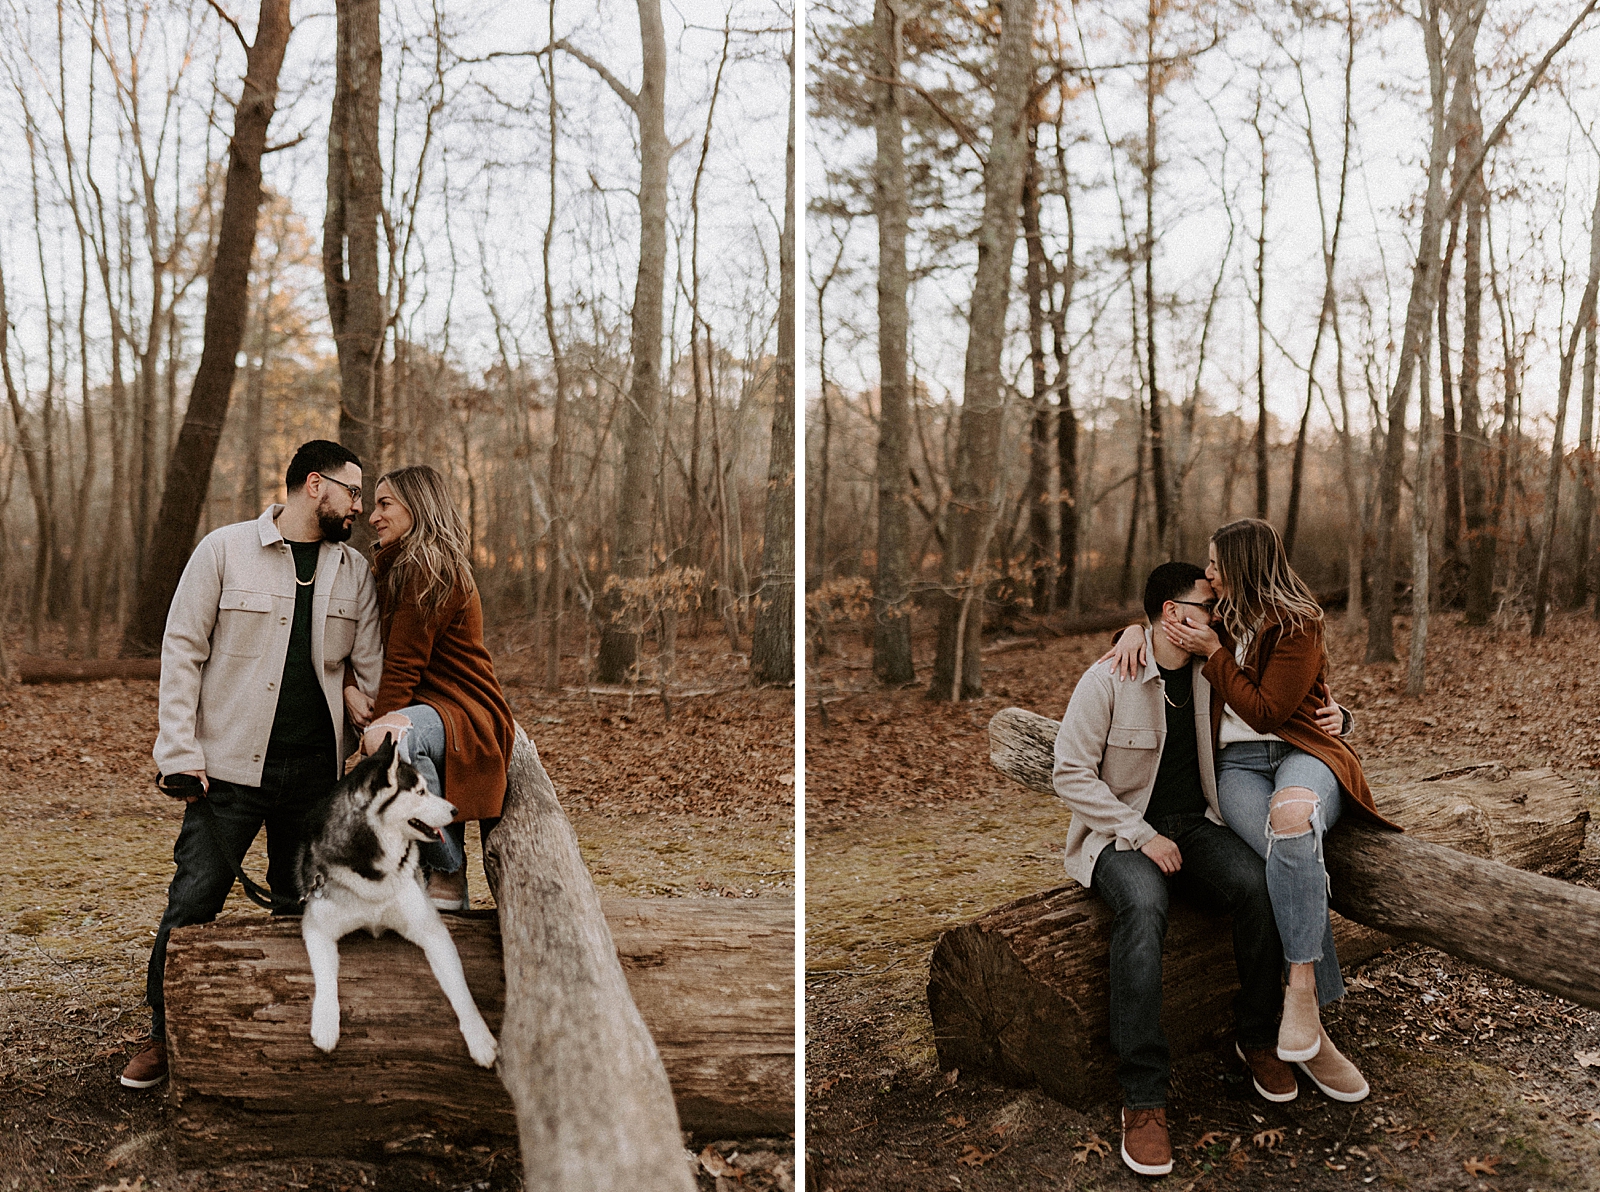 Couple next to each other looking at each other with Husky dog next to fallen tree log